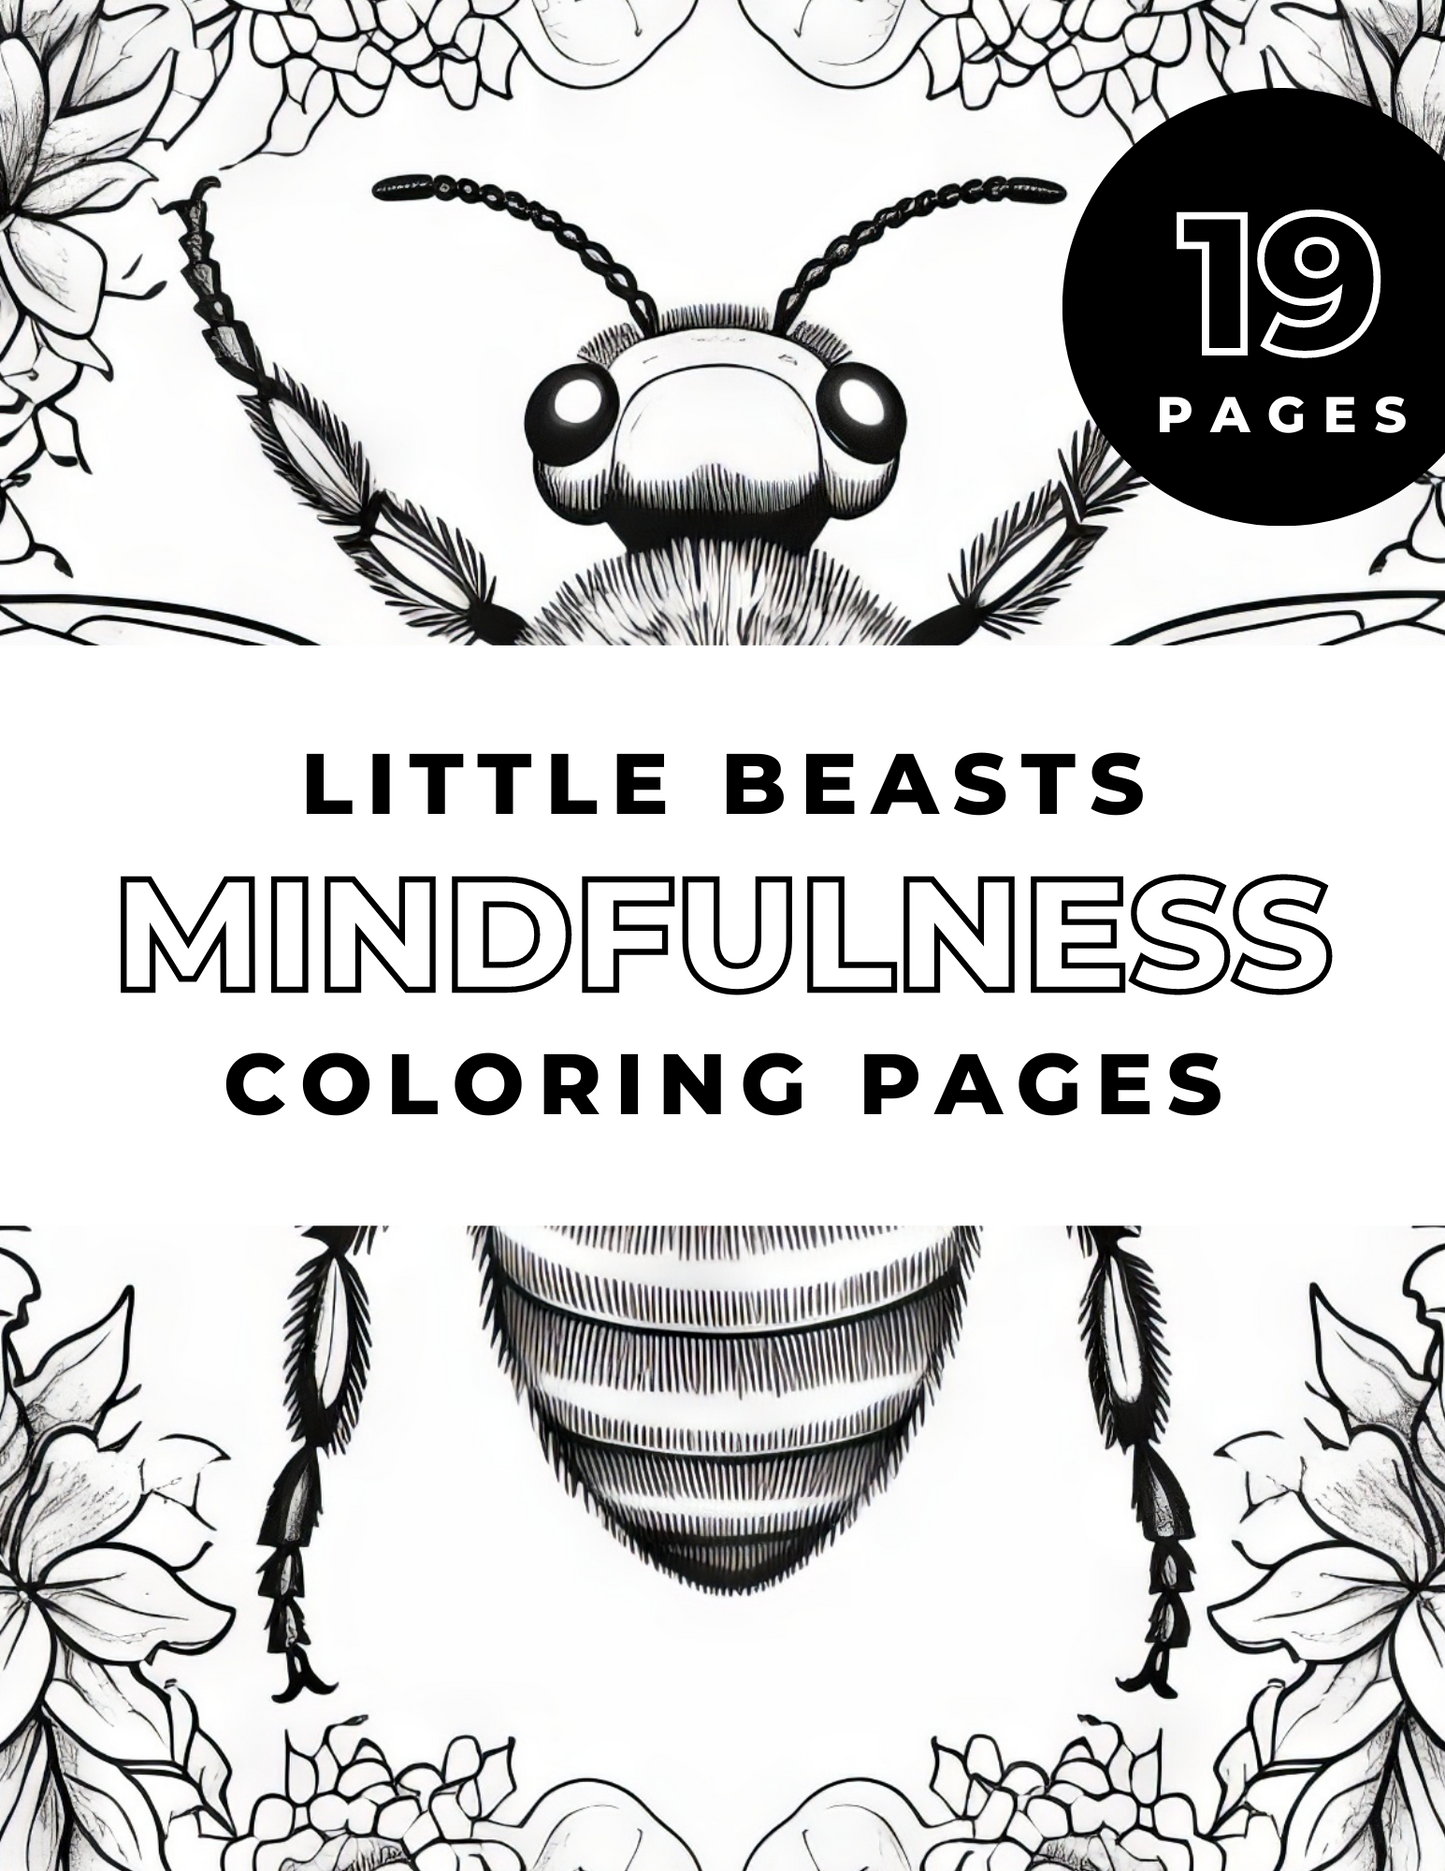 The Mindfulness Little Beasts Digital Coloring Book